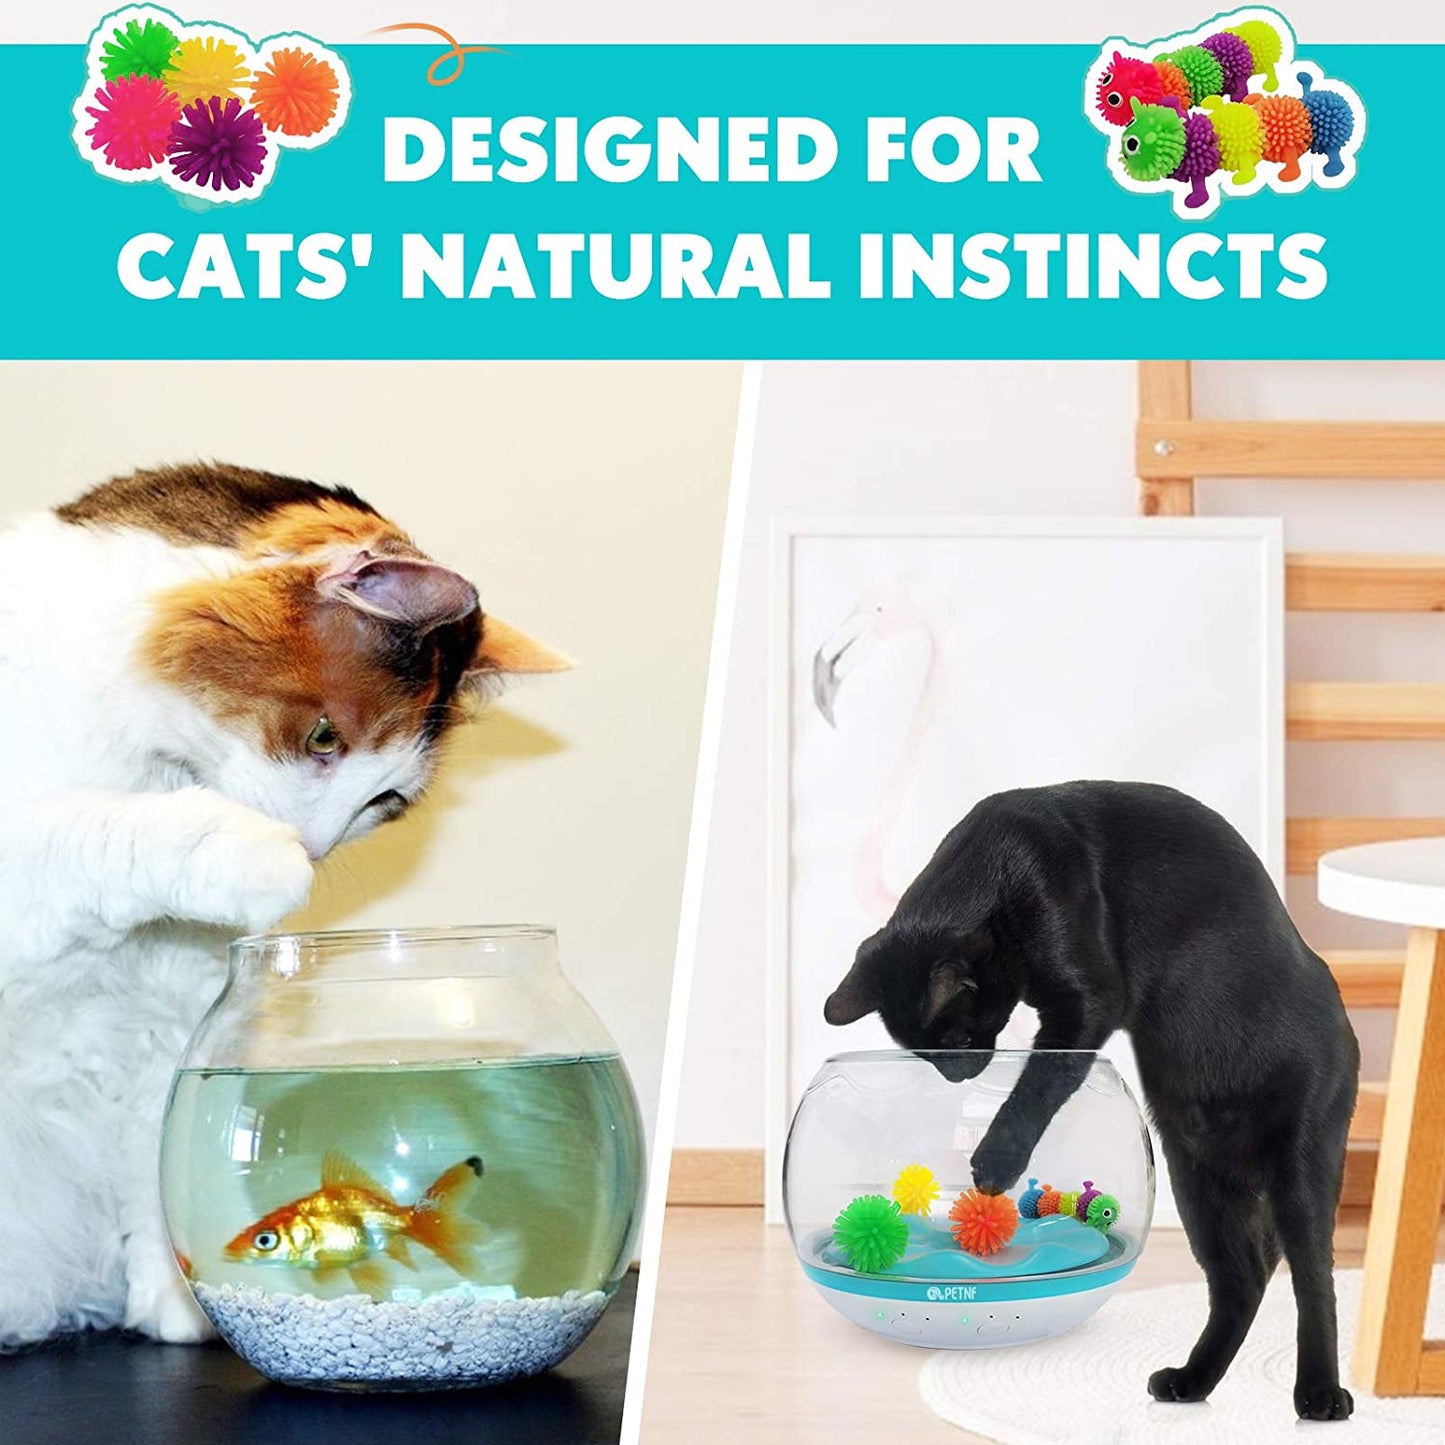 Newest Interactive Cat Toy,Fish Bowl-Shaped Kitten Toys,Cat